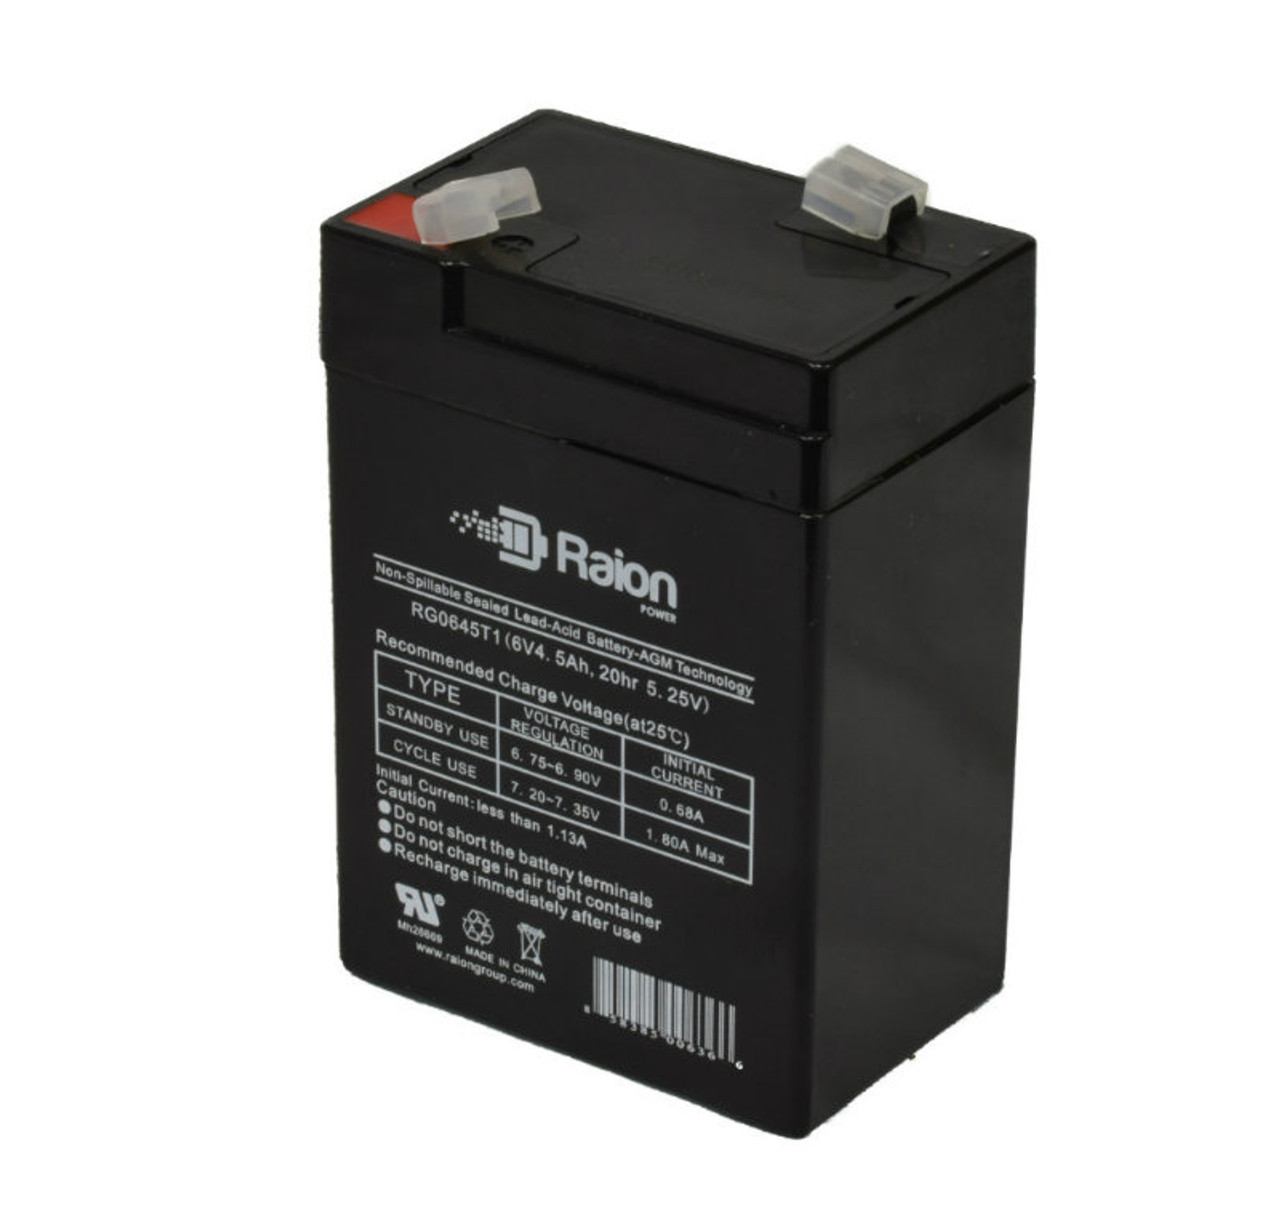 Raion Power RG0645T1 6V 4.5Ah Replacement Battery Cartridge for FengSheng FS6-5